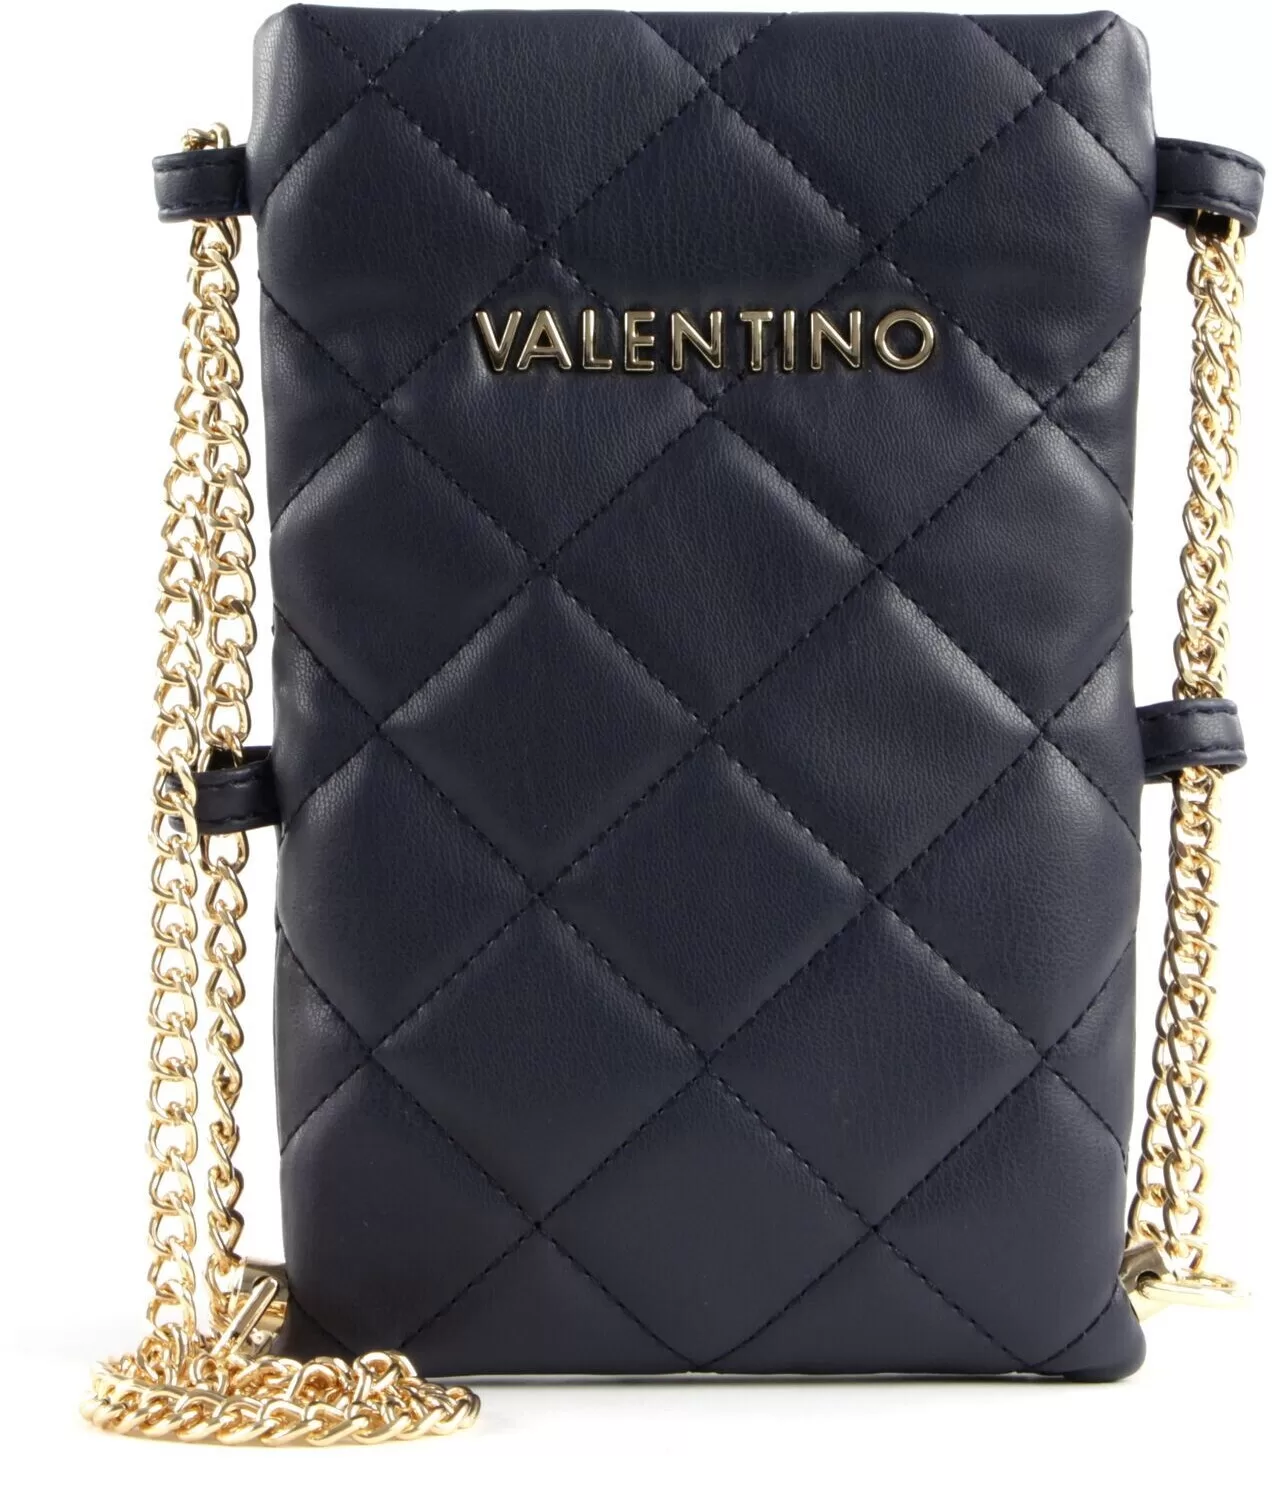 VALENTINO GARAVANI VLTN embossed leather pouch | THE OUTNET